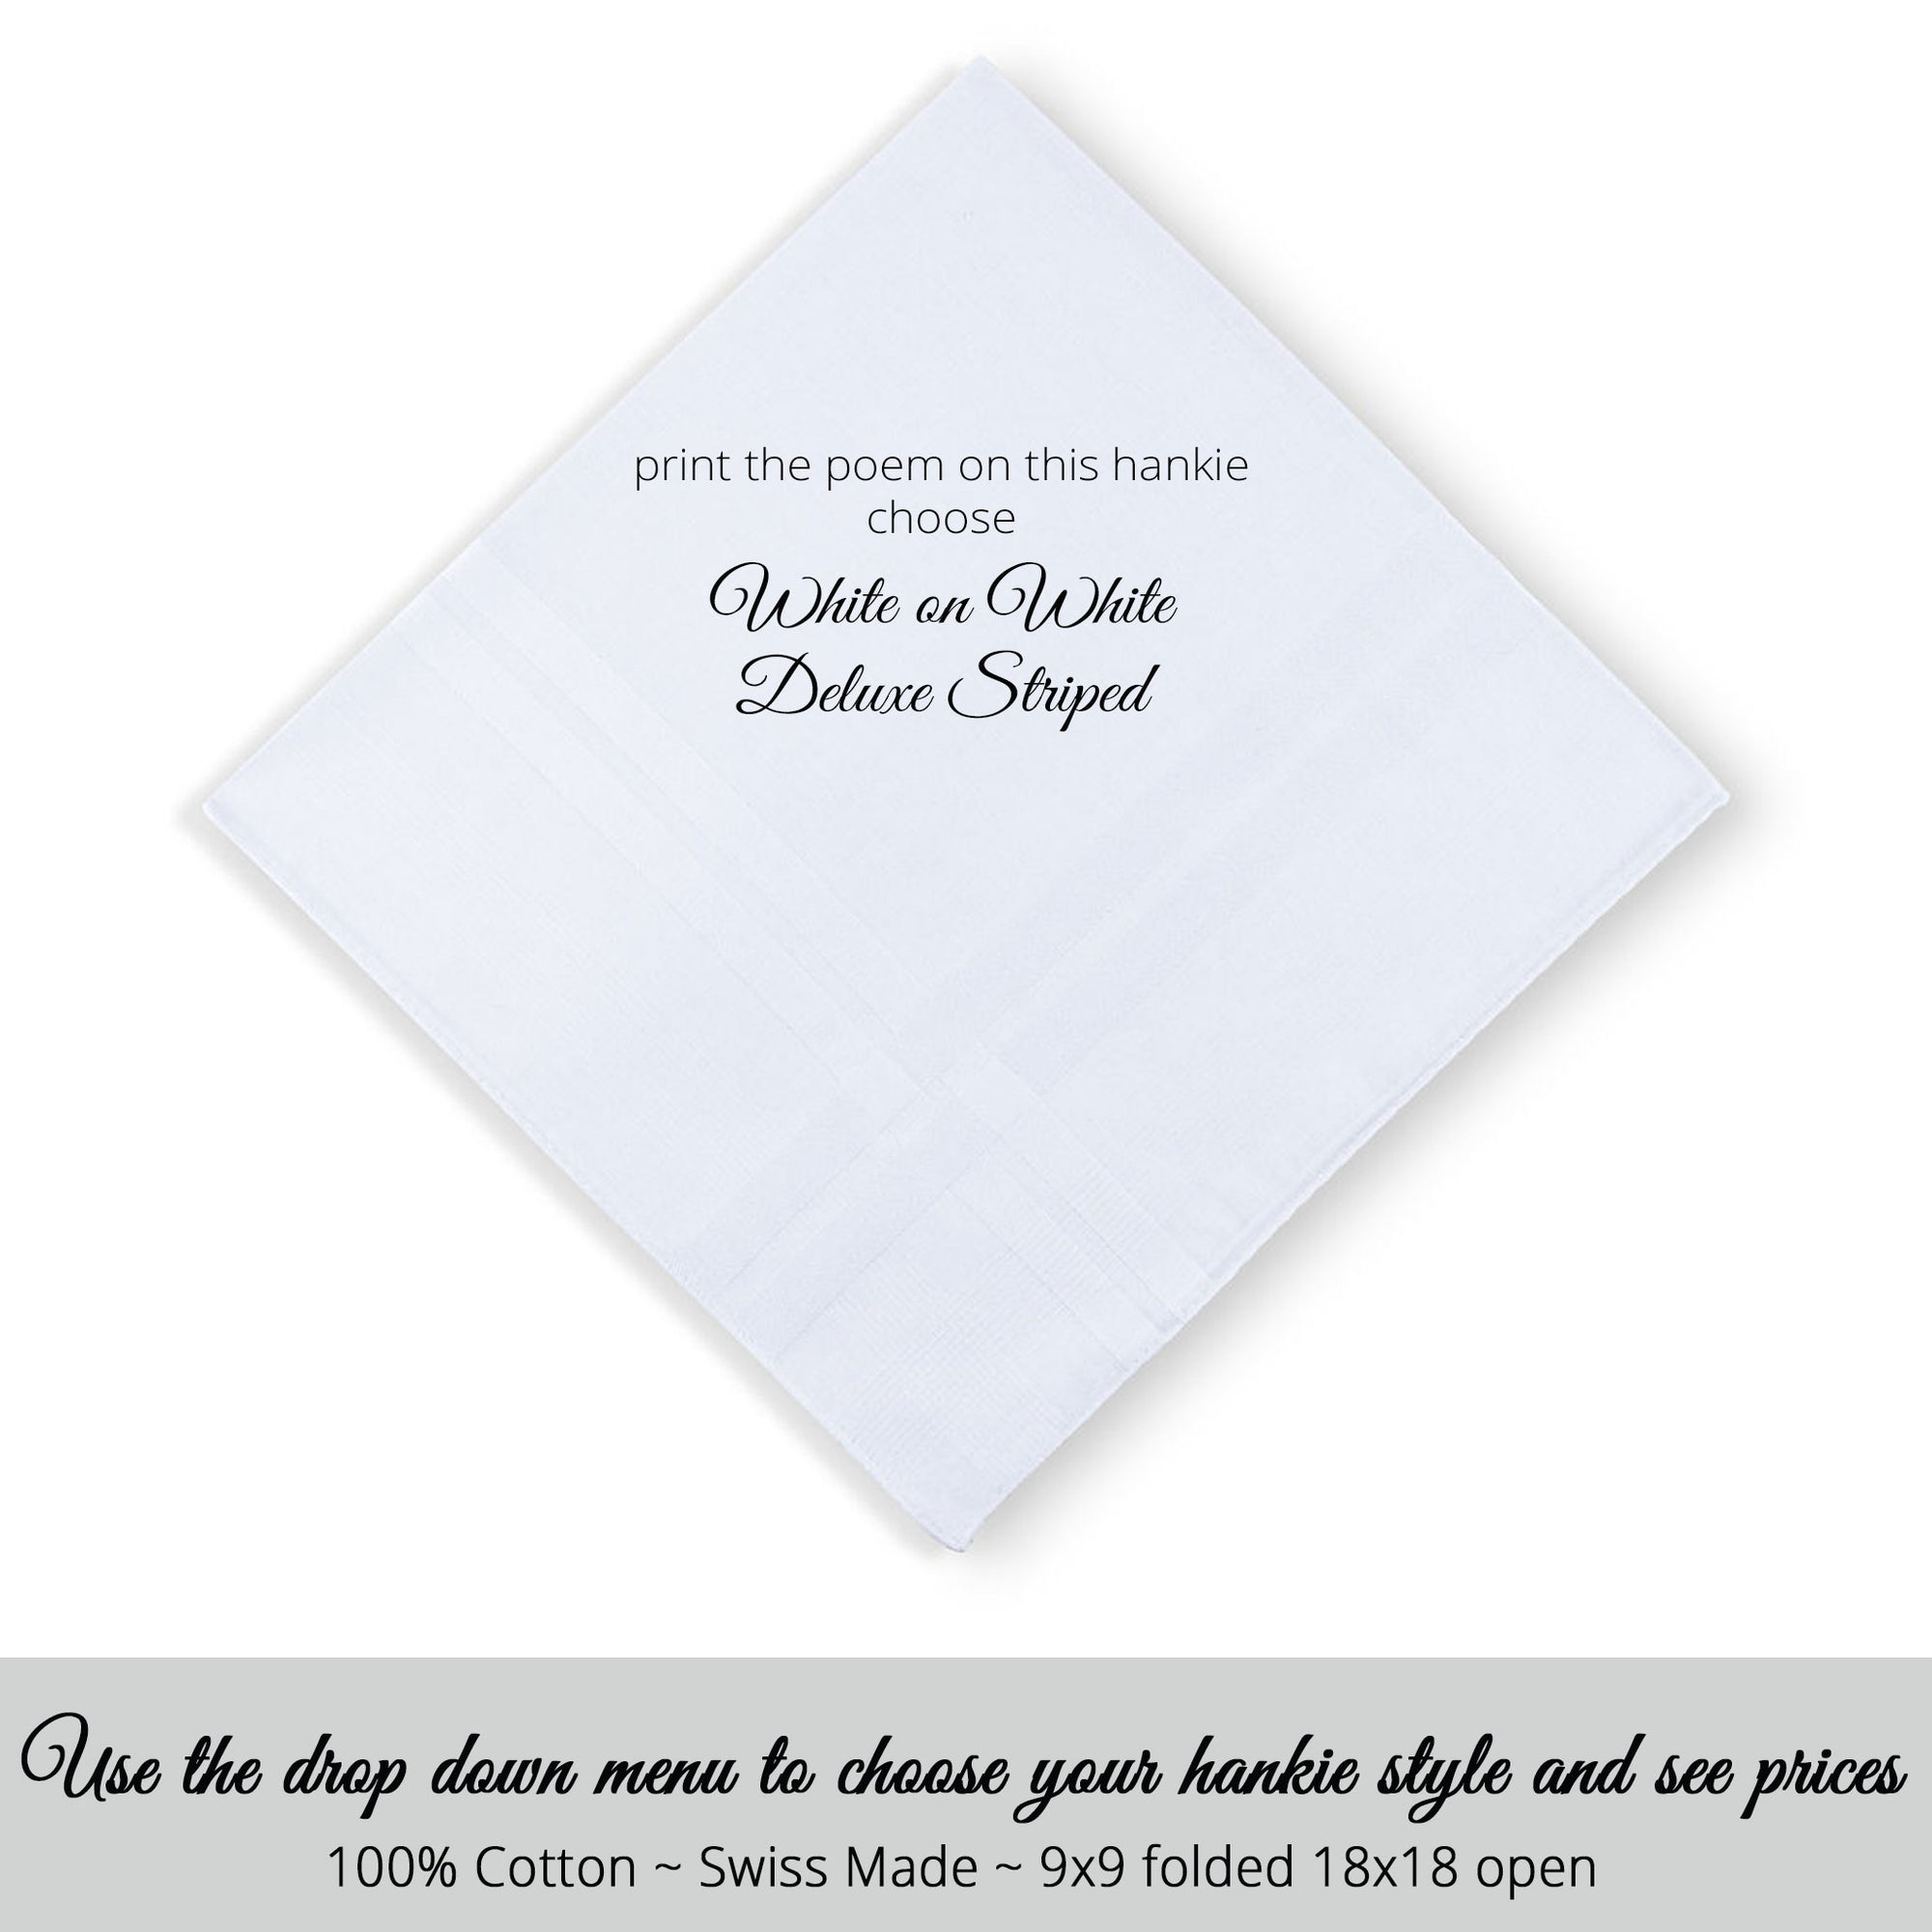 Wedding Handkerchief Swiss made man’s white on white  deluxe striped for personalized poem for the brother of the bride